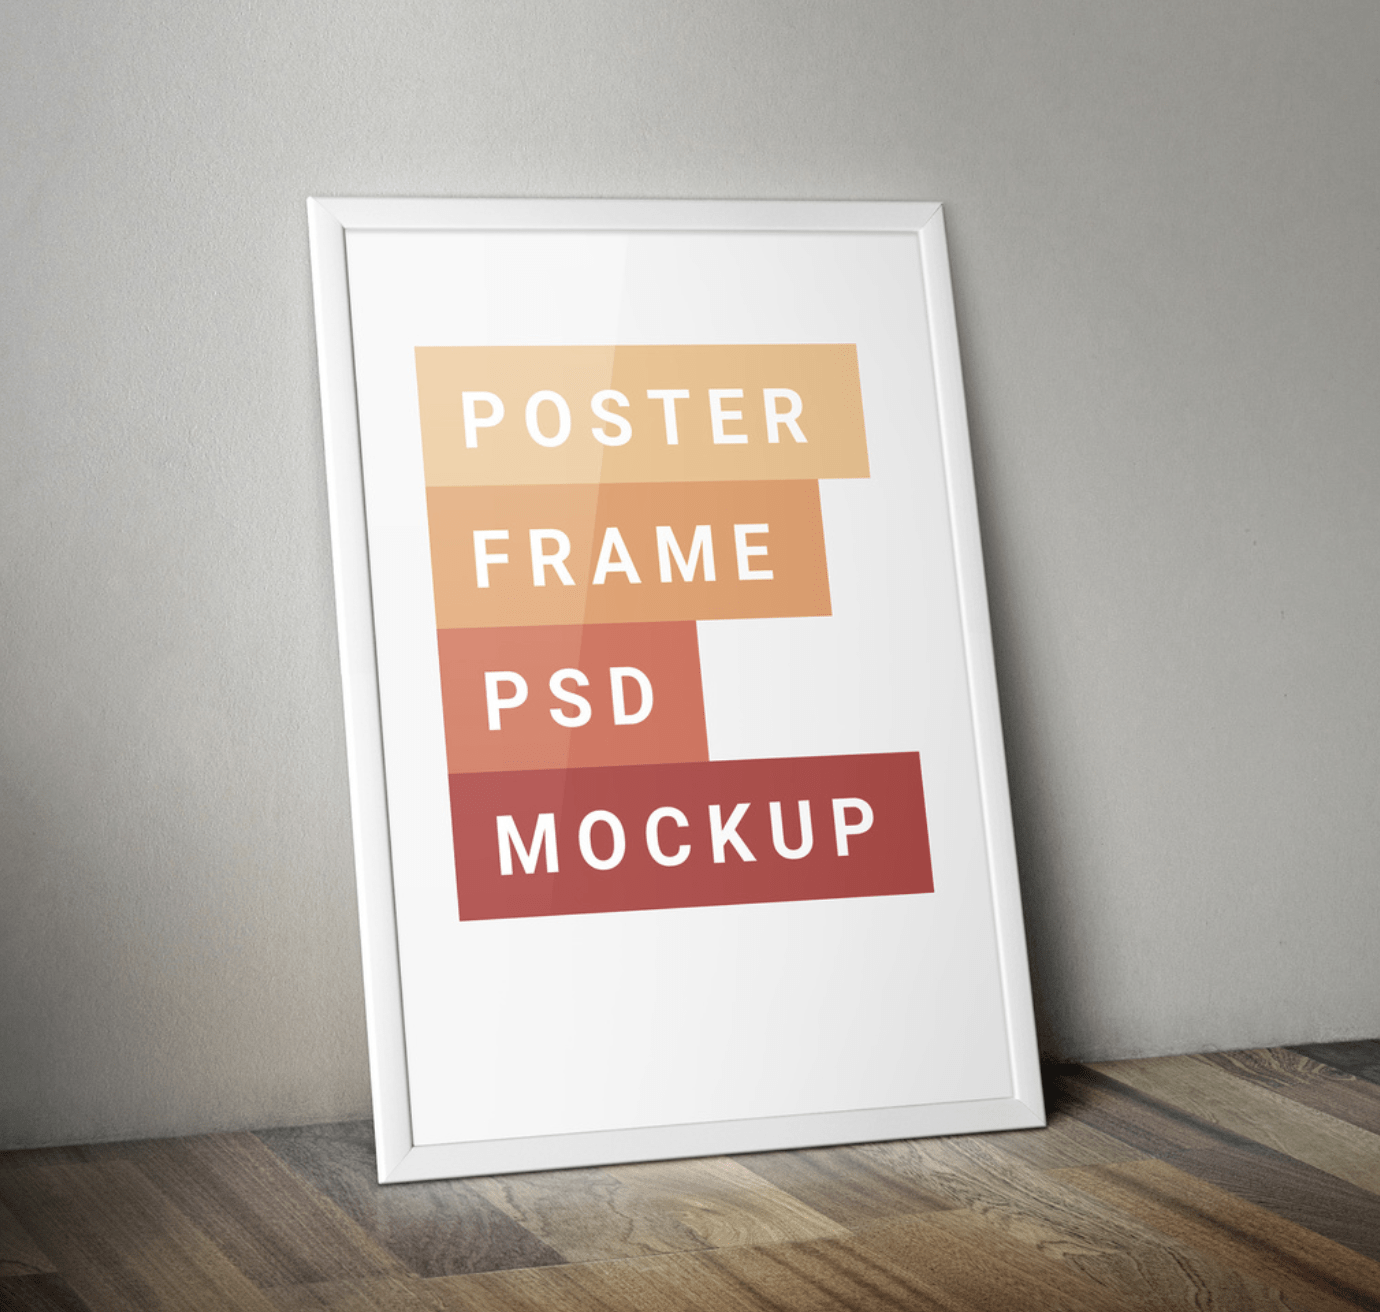 A realistic leaning poster frame mockup set against a neutral wall, demonstrating a vertical and horizontal frame option.